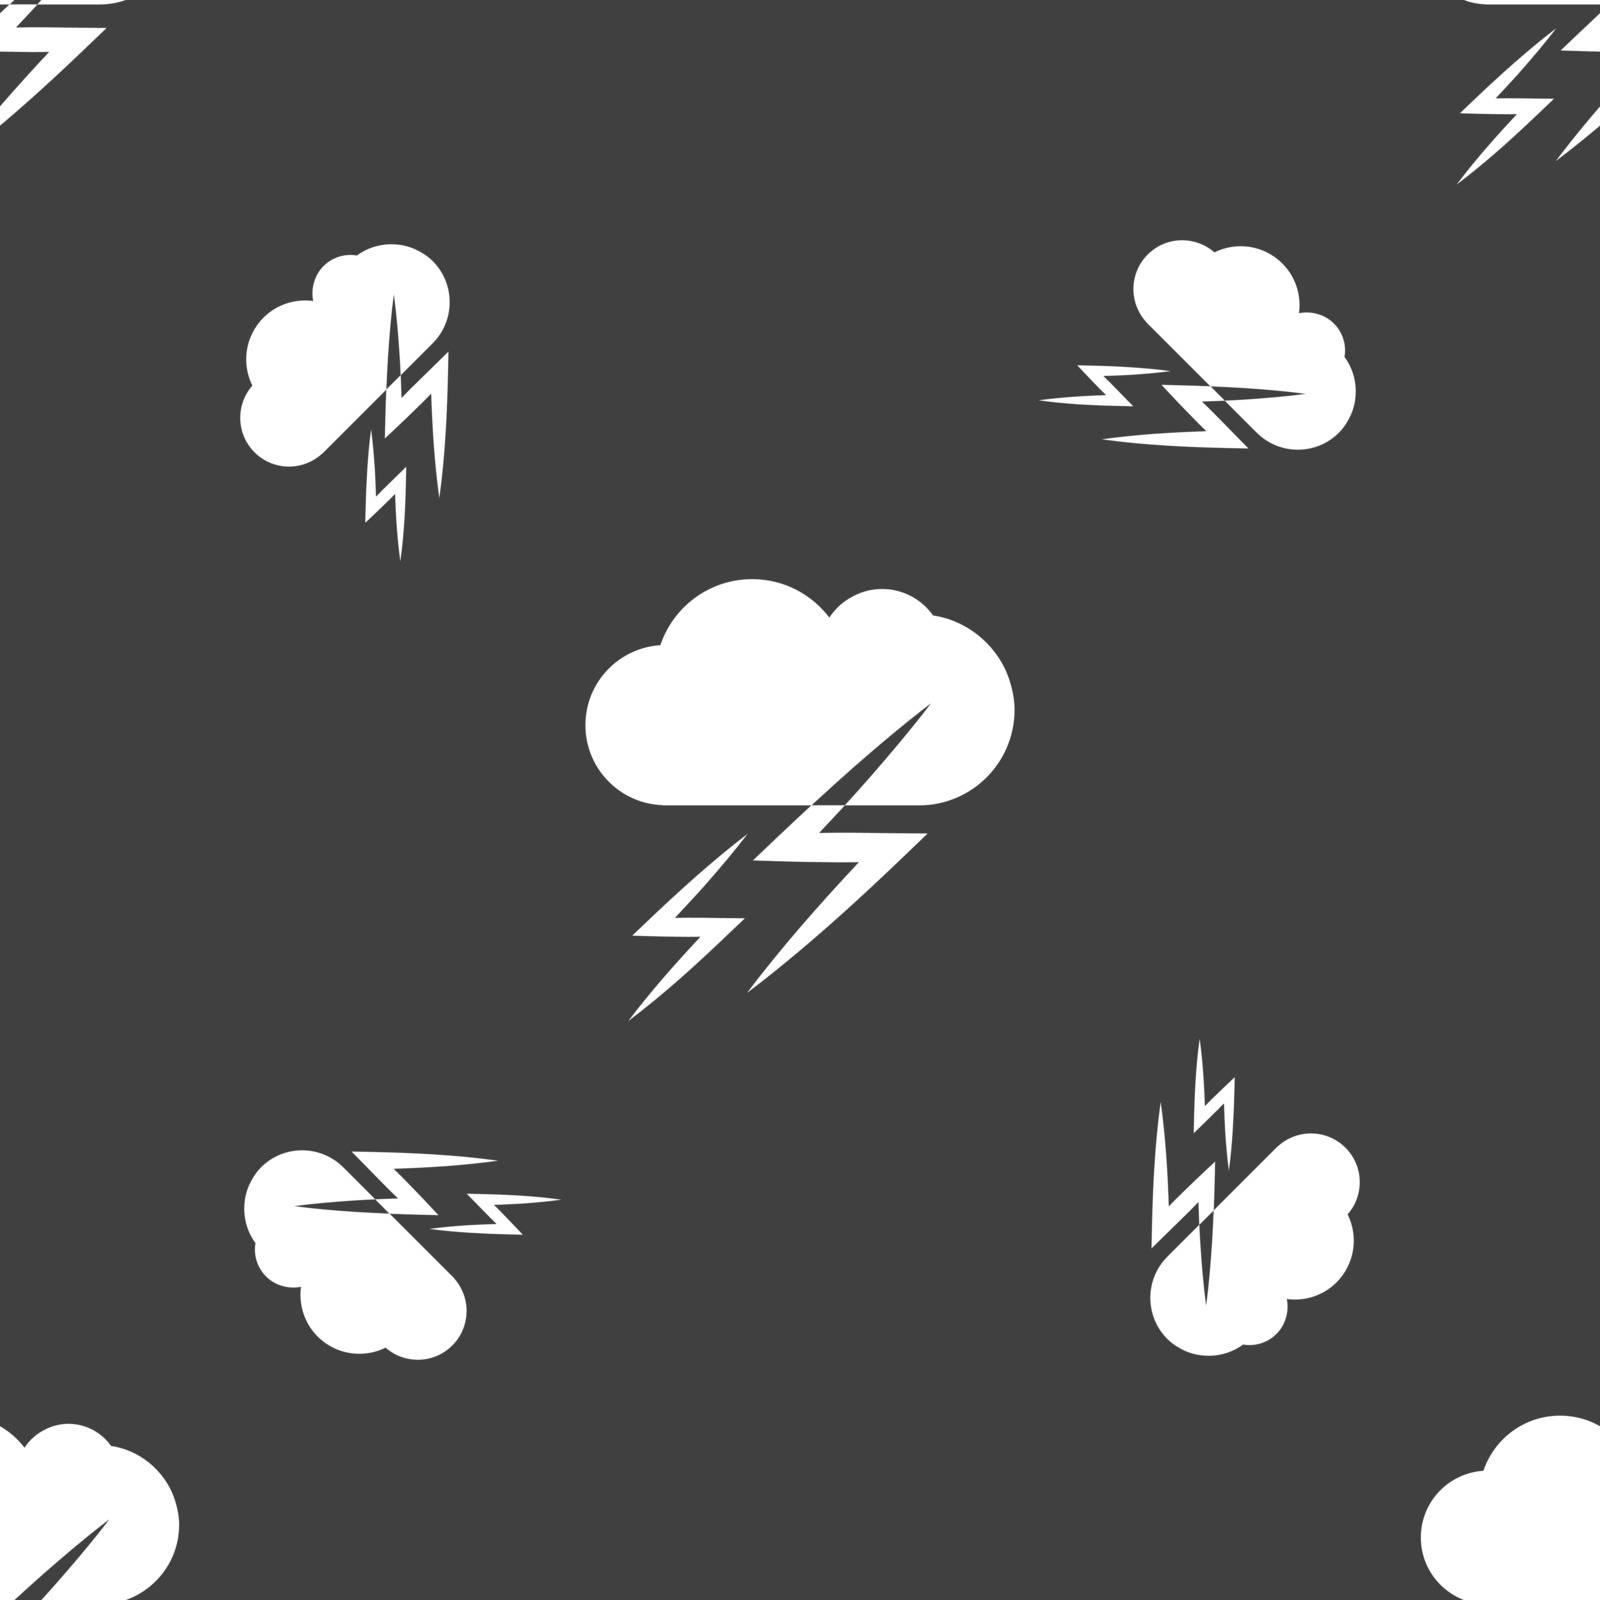 Weather icon sign. Seamless pattern on a gray background. Vector illustration